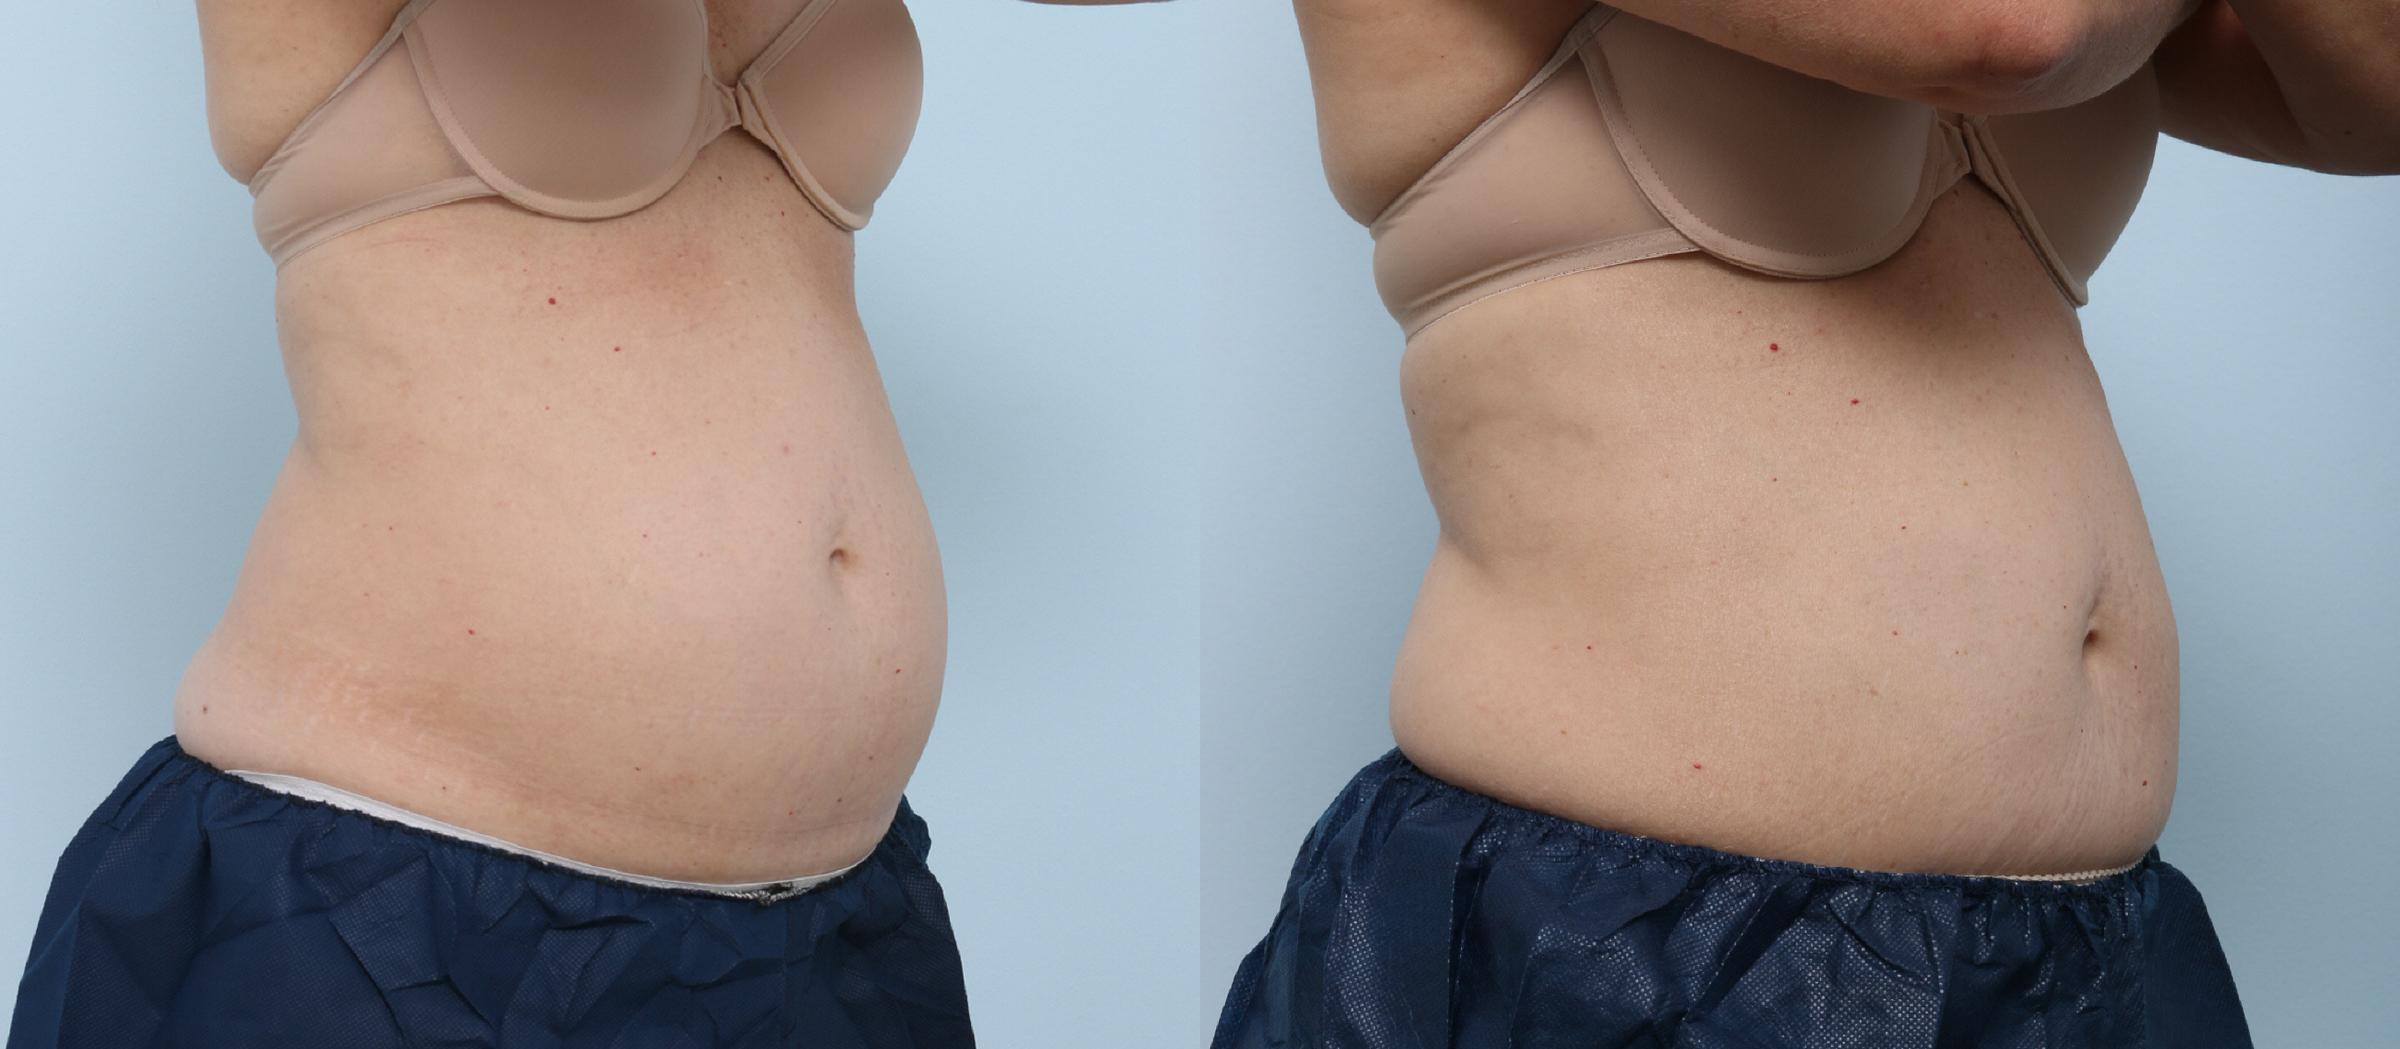  before and after pictures in , , Four Common Problem Areas That are Perfect for CoolSculpting